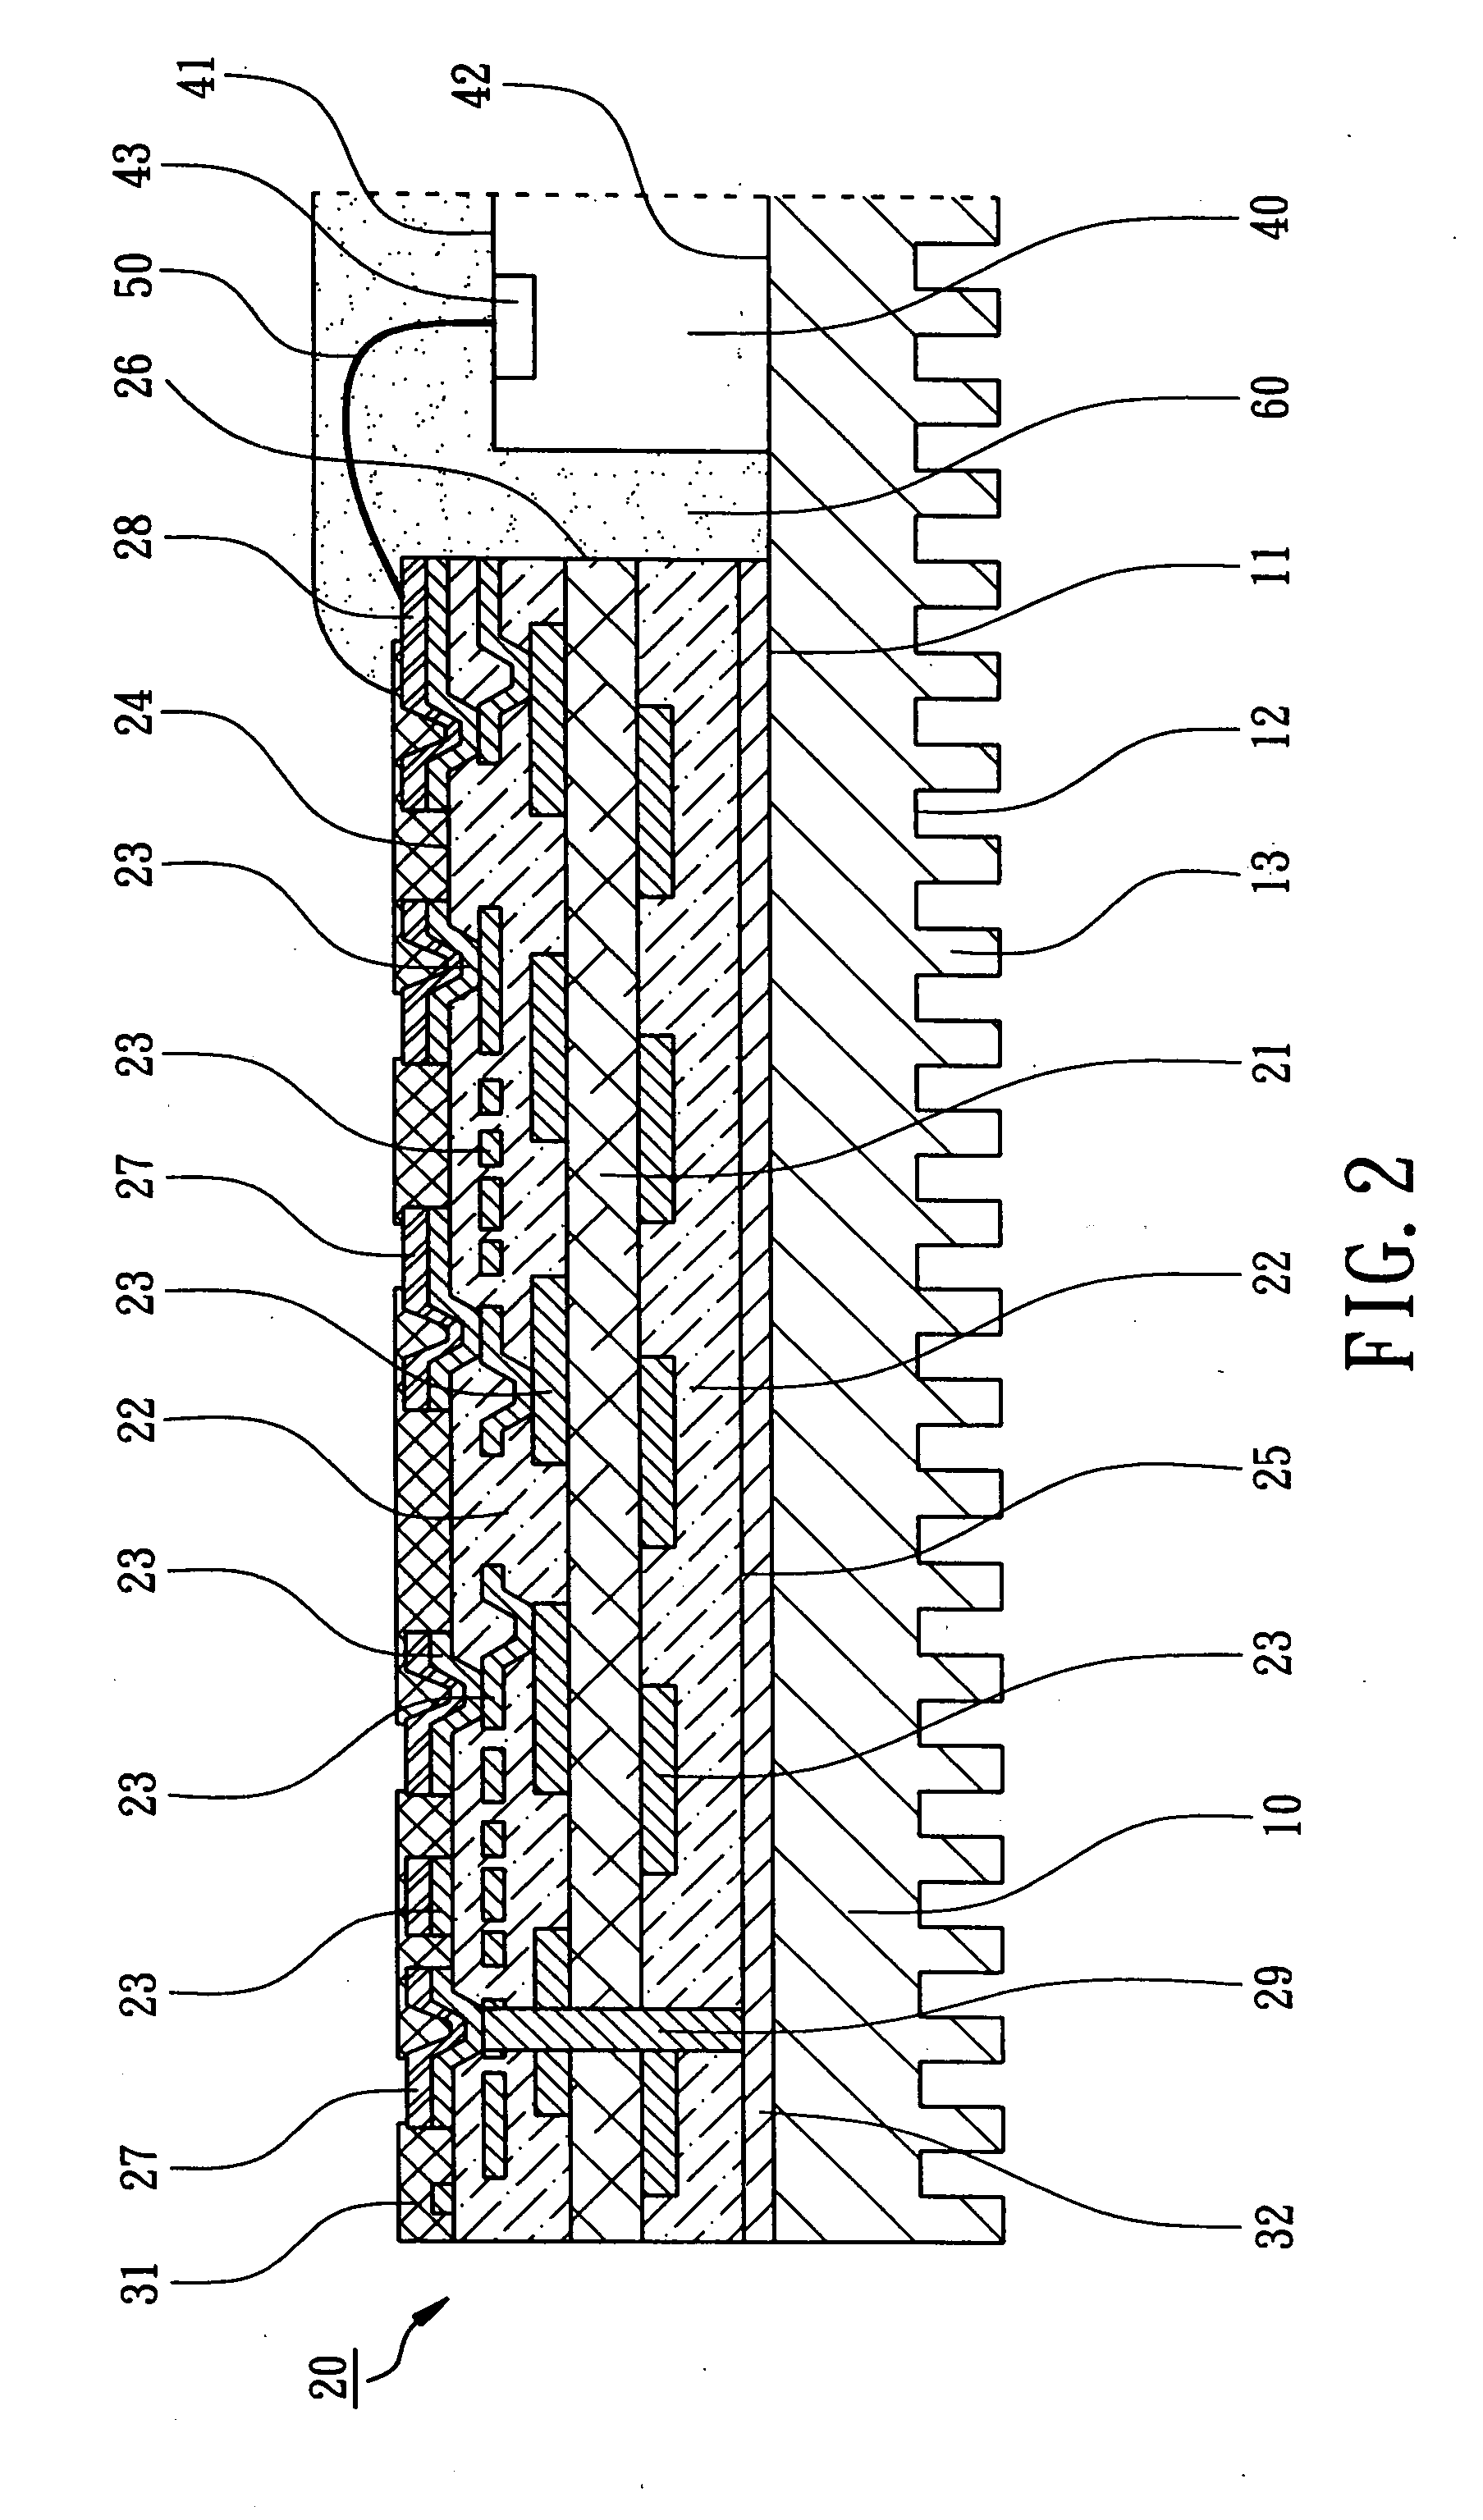 Cavity-down semiconductor package with heat spreader